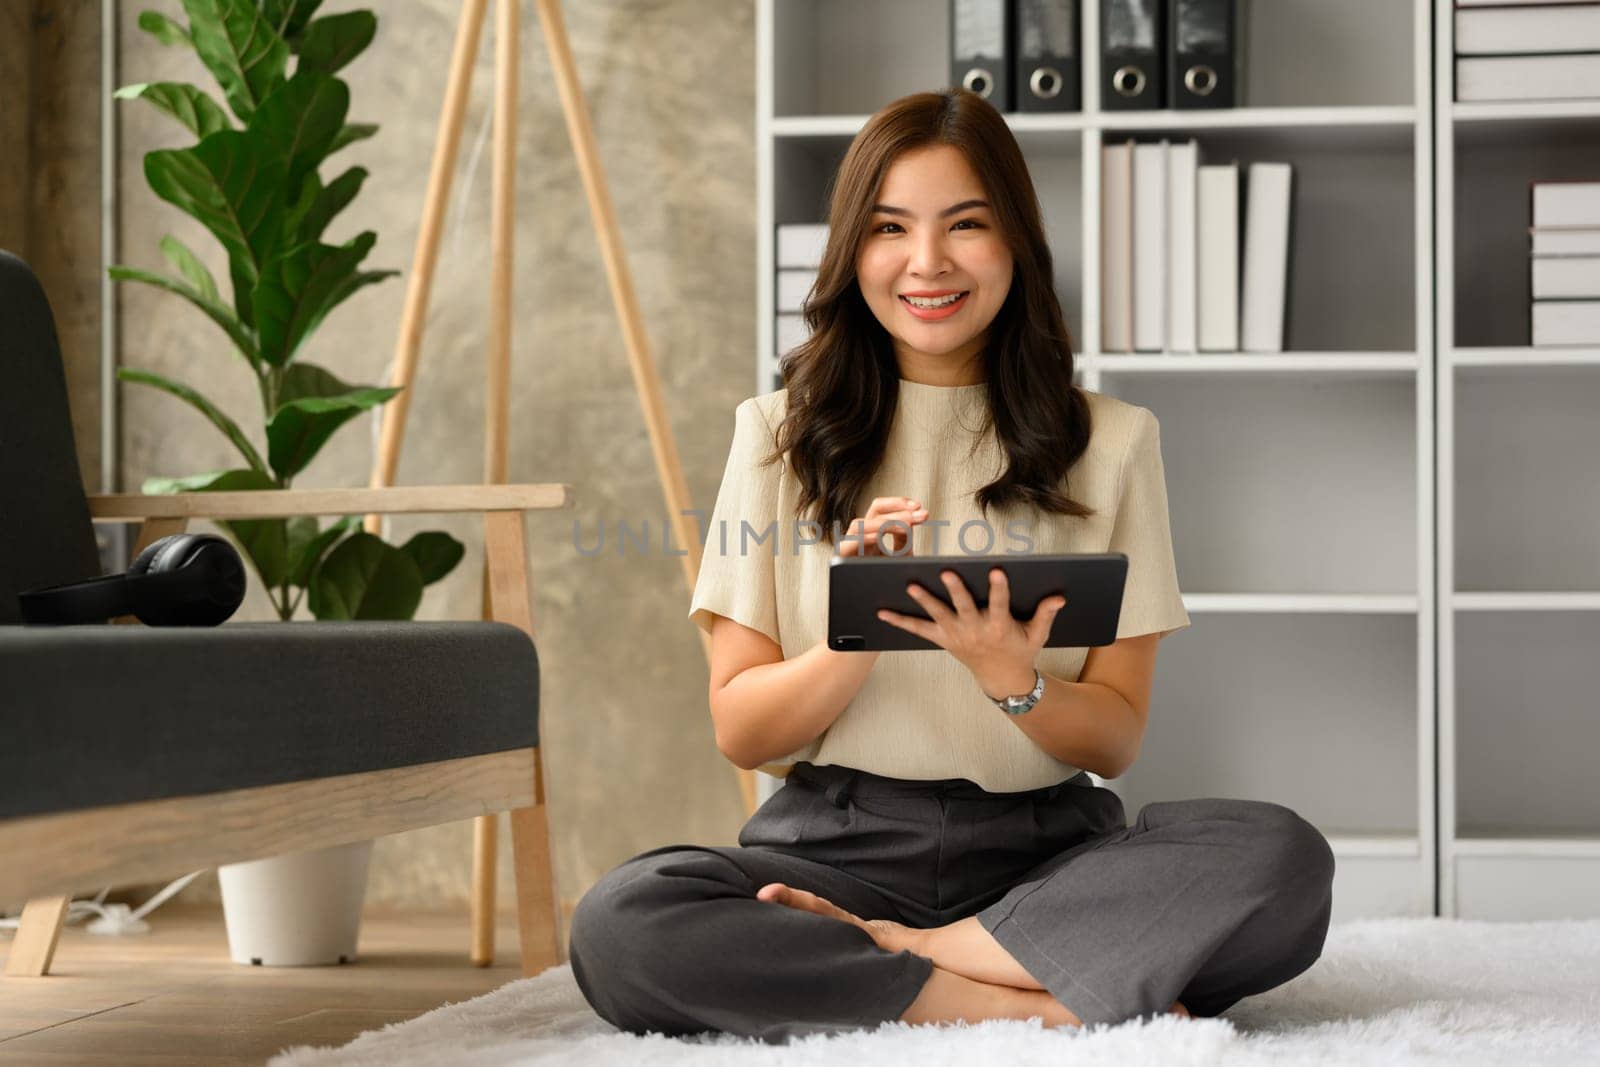 Full length of happy millennial woman using digital tablet in living room. Technology, people and lifestyle concept.